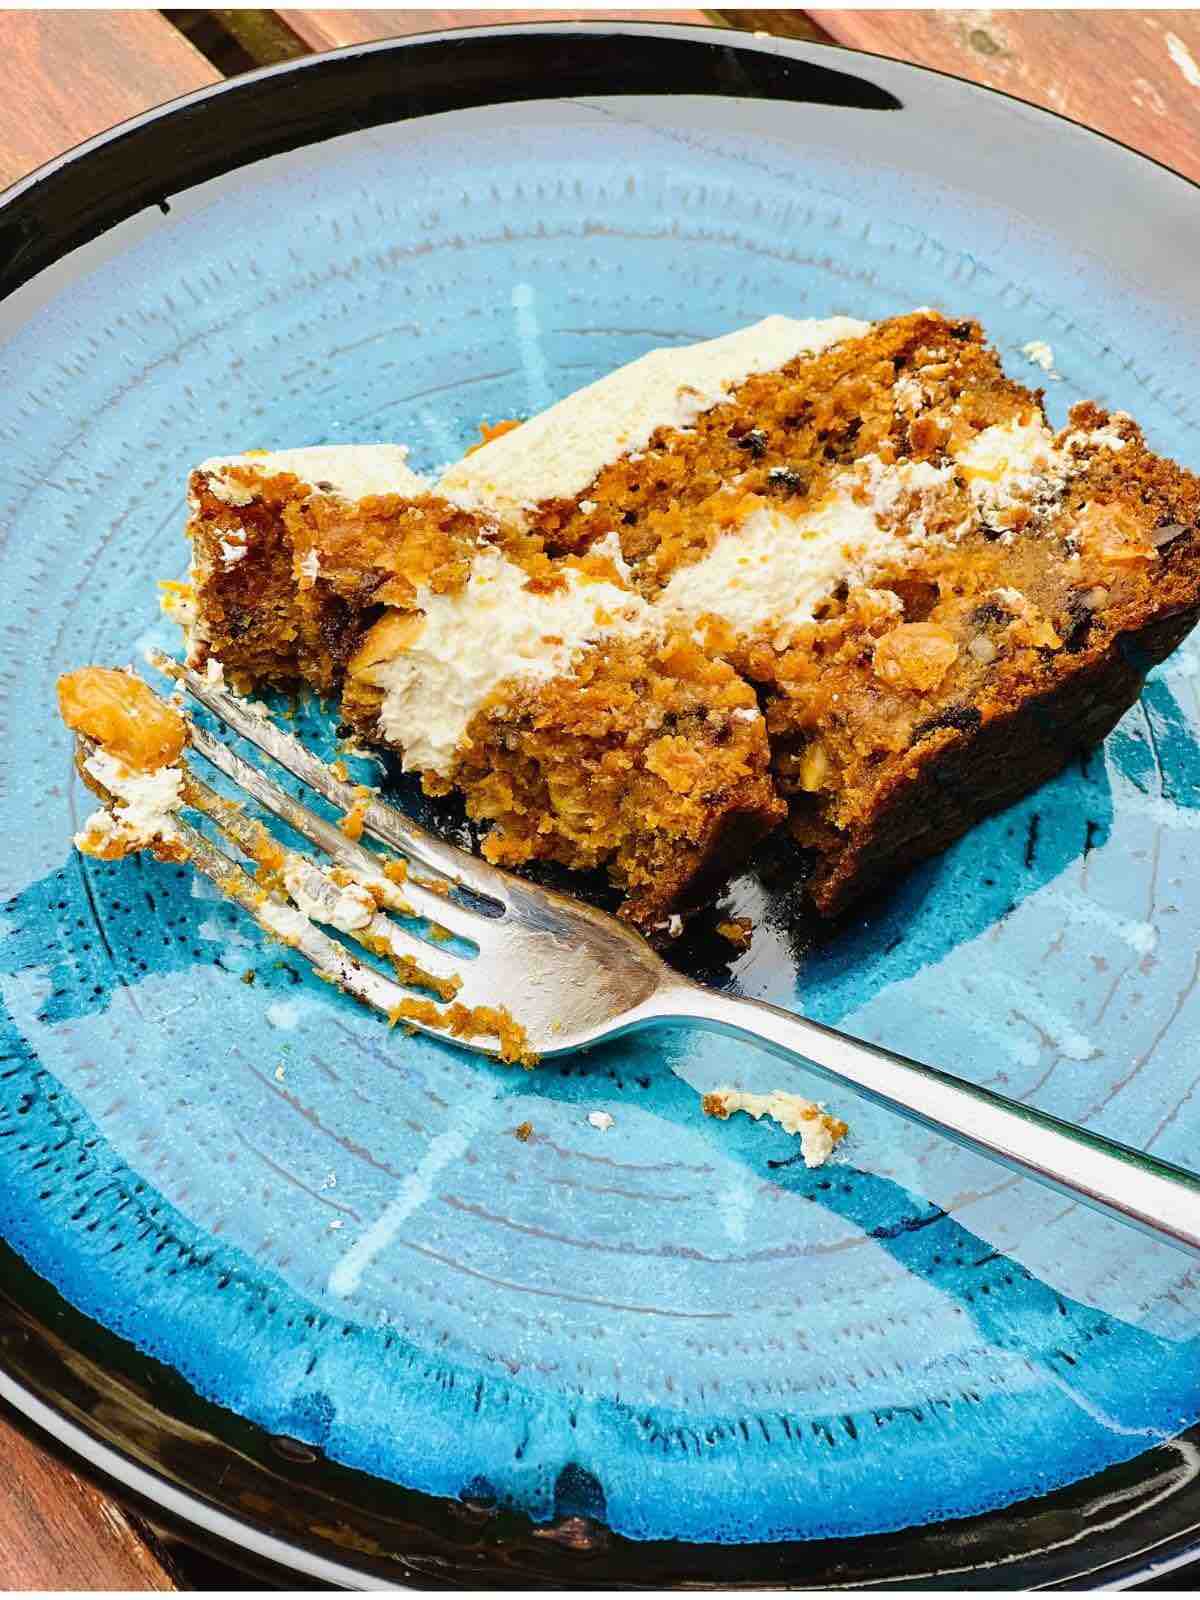 A slice of Carrot Cake